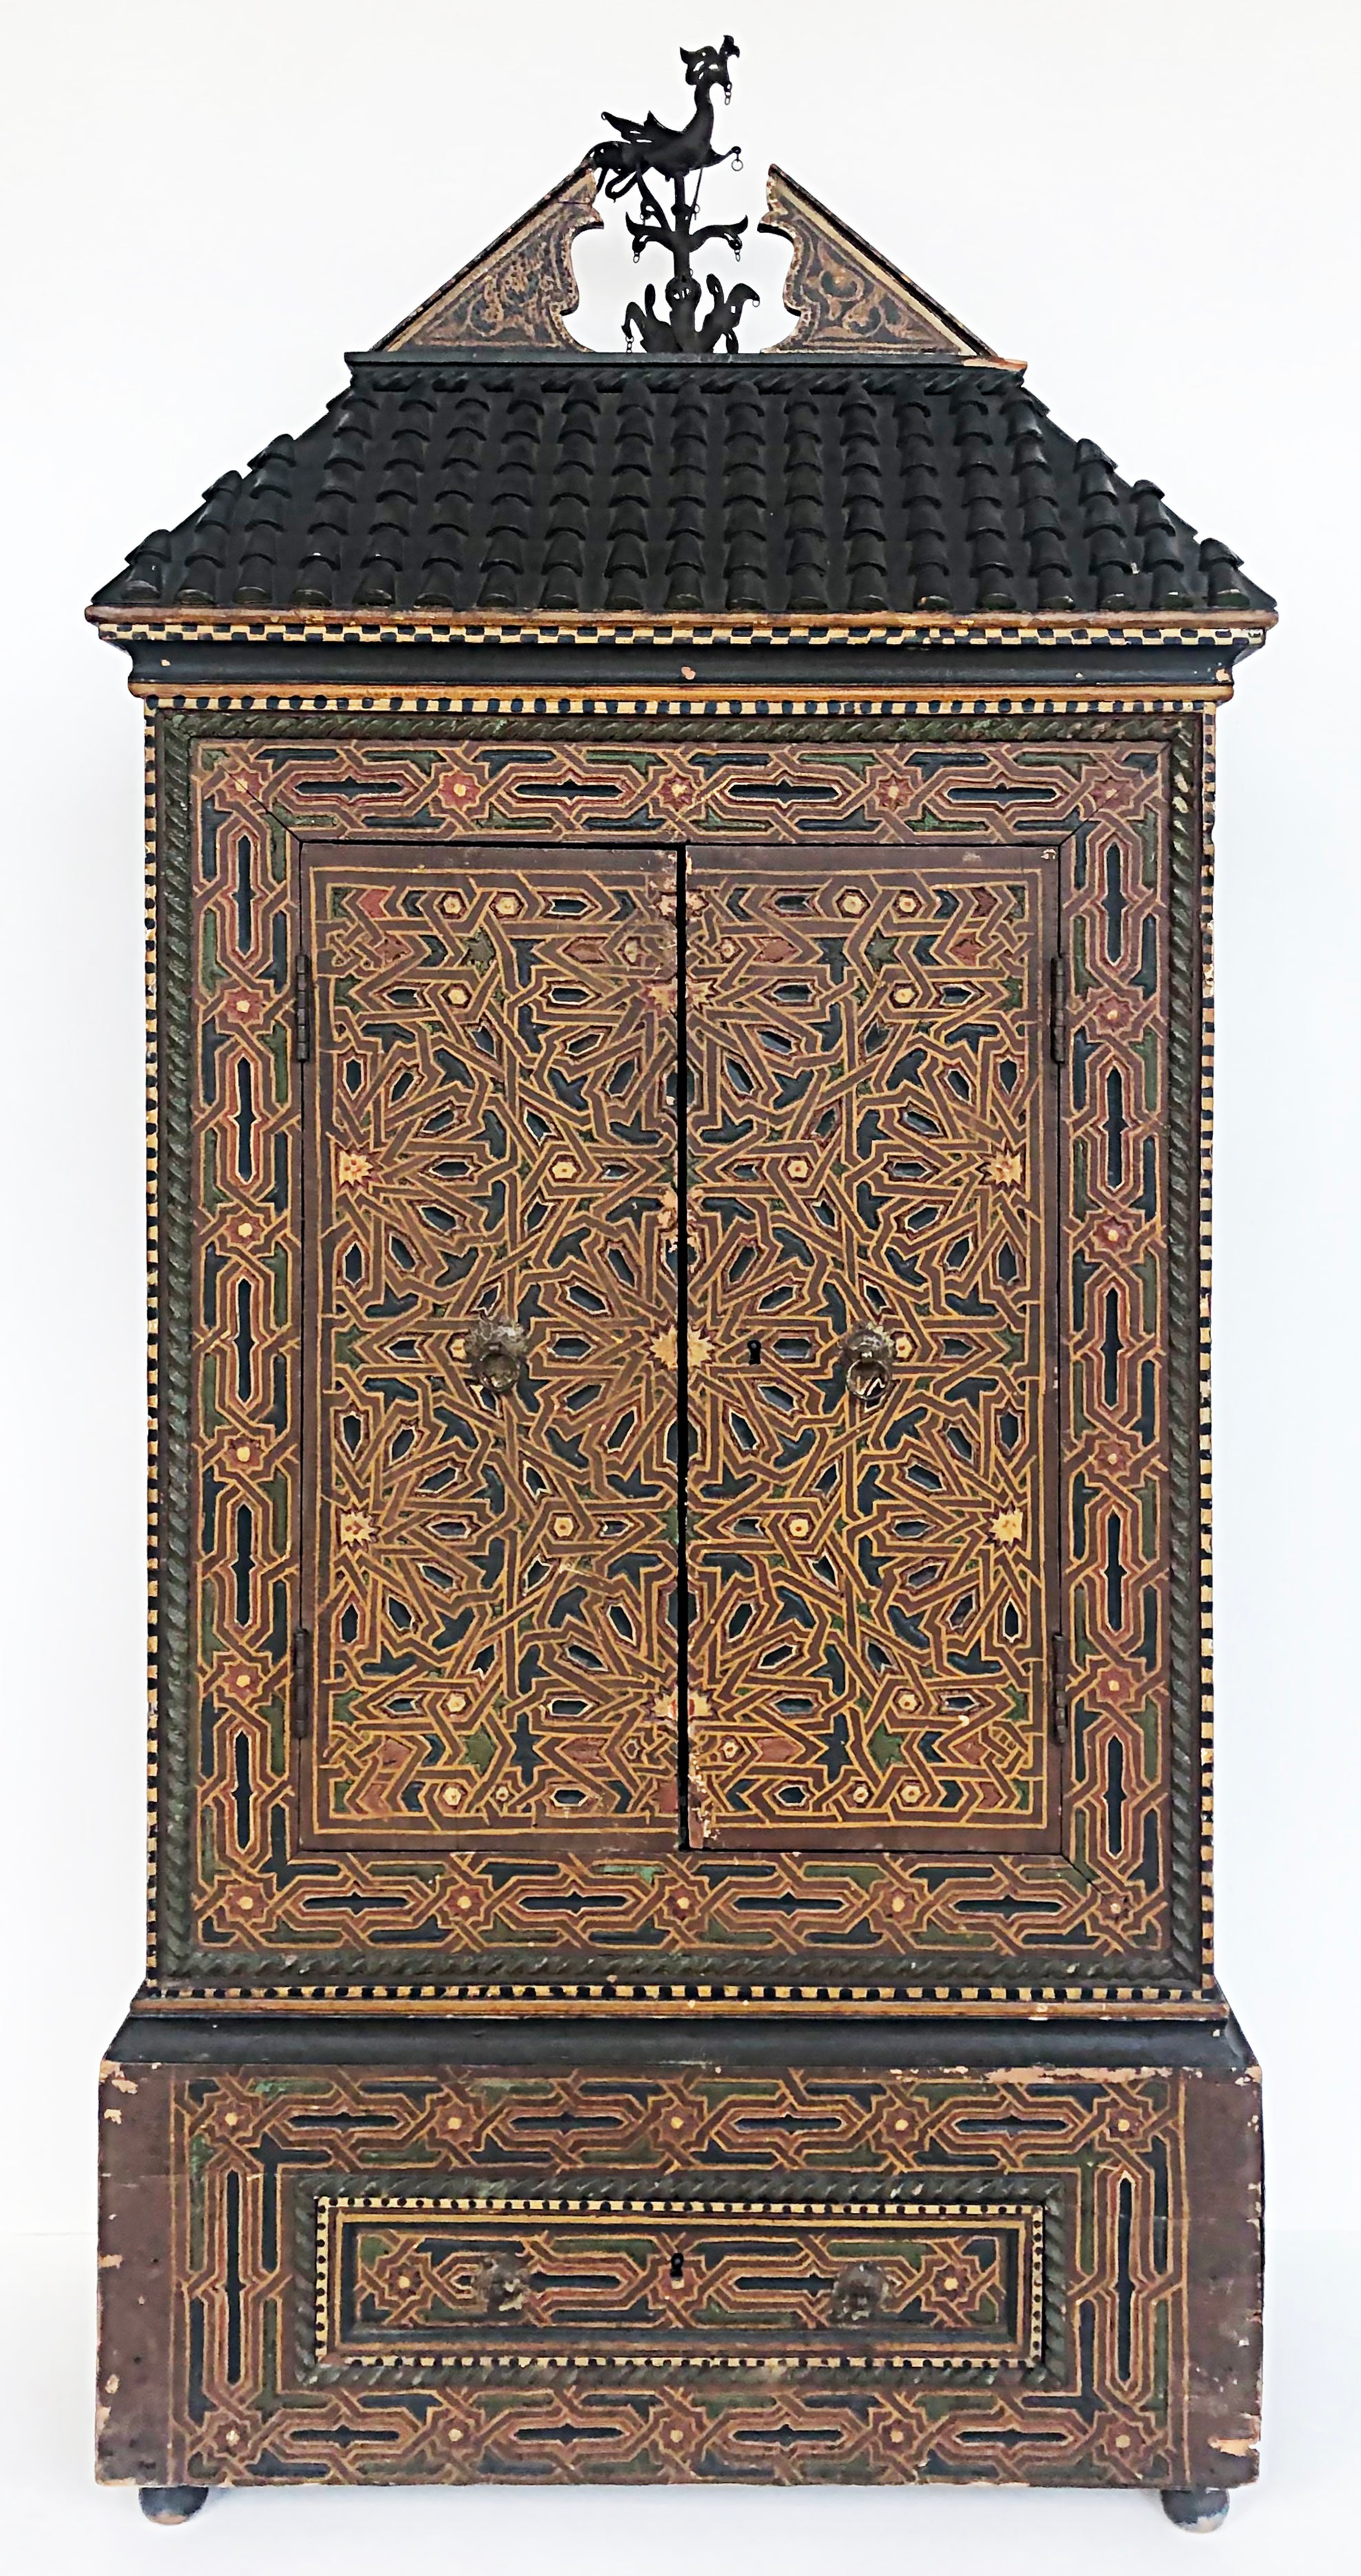 Hand-Carved Eclectic Antique Asian Polychrome Wood Cabinet, Embellished Roof